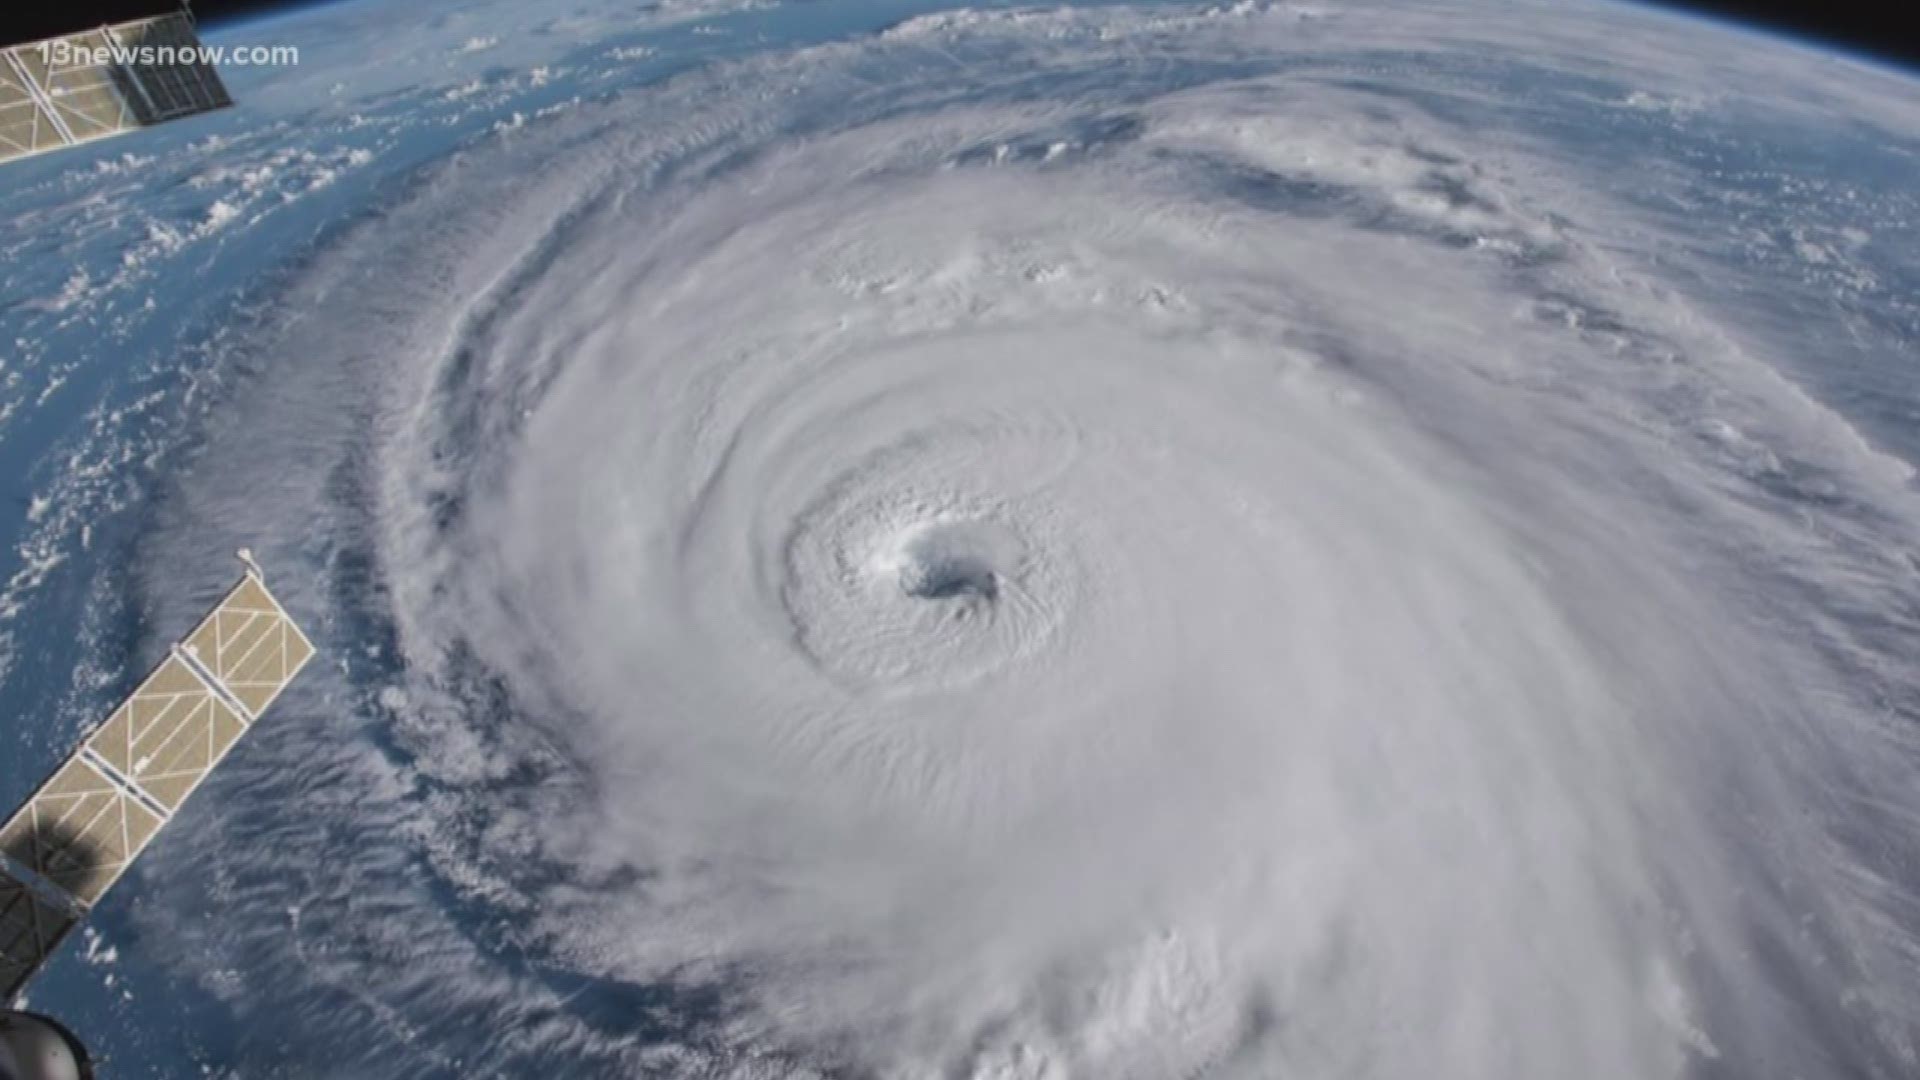 According to researchers at Old Dominion University, a direct hit from a hurricane could cost the area up to, or more than, $40 billion and 175,000 jobs.